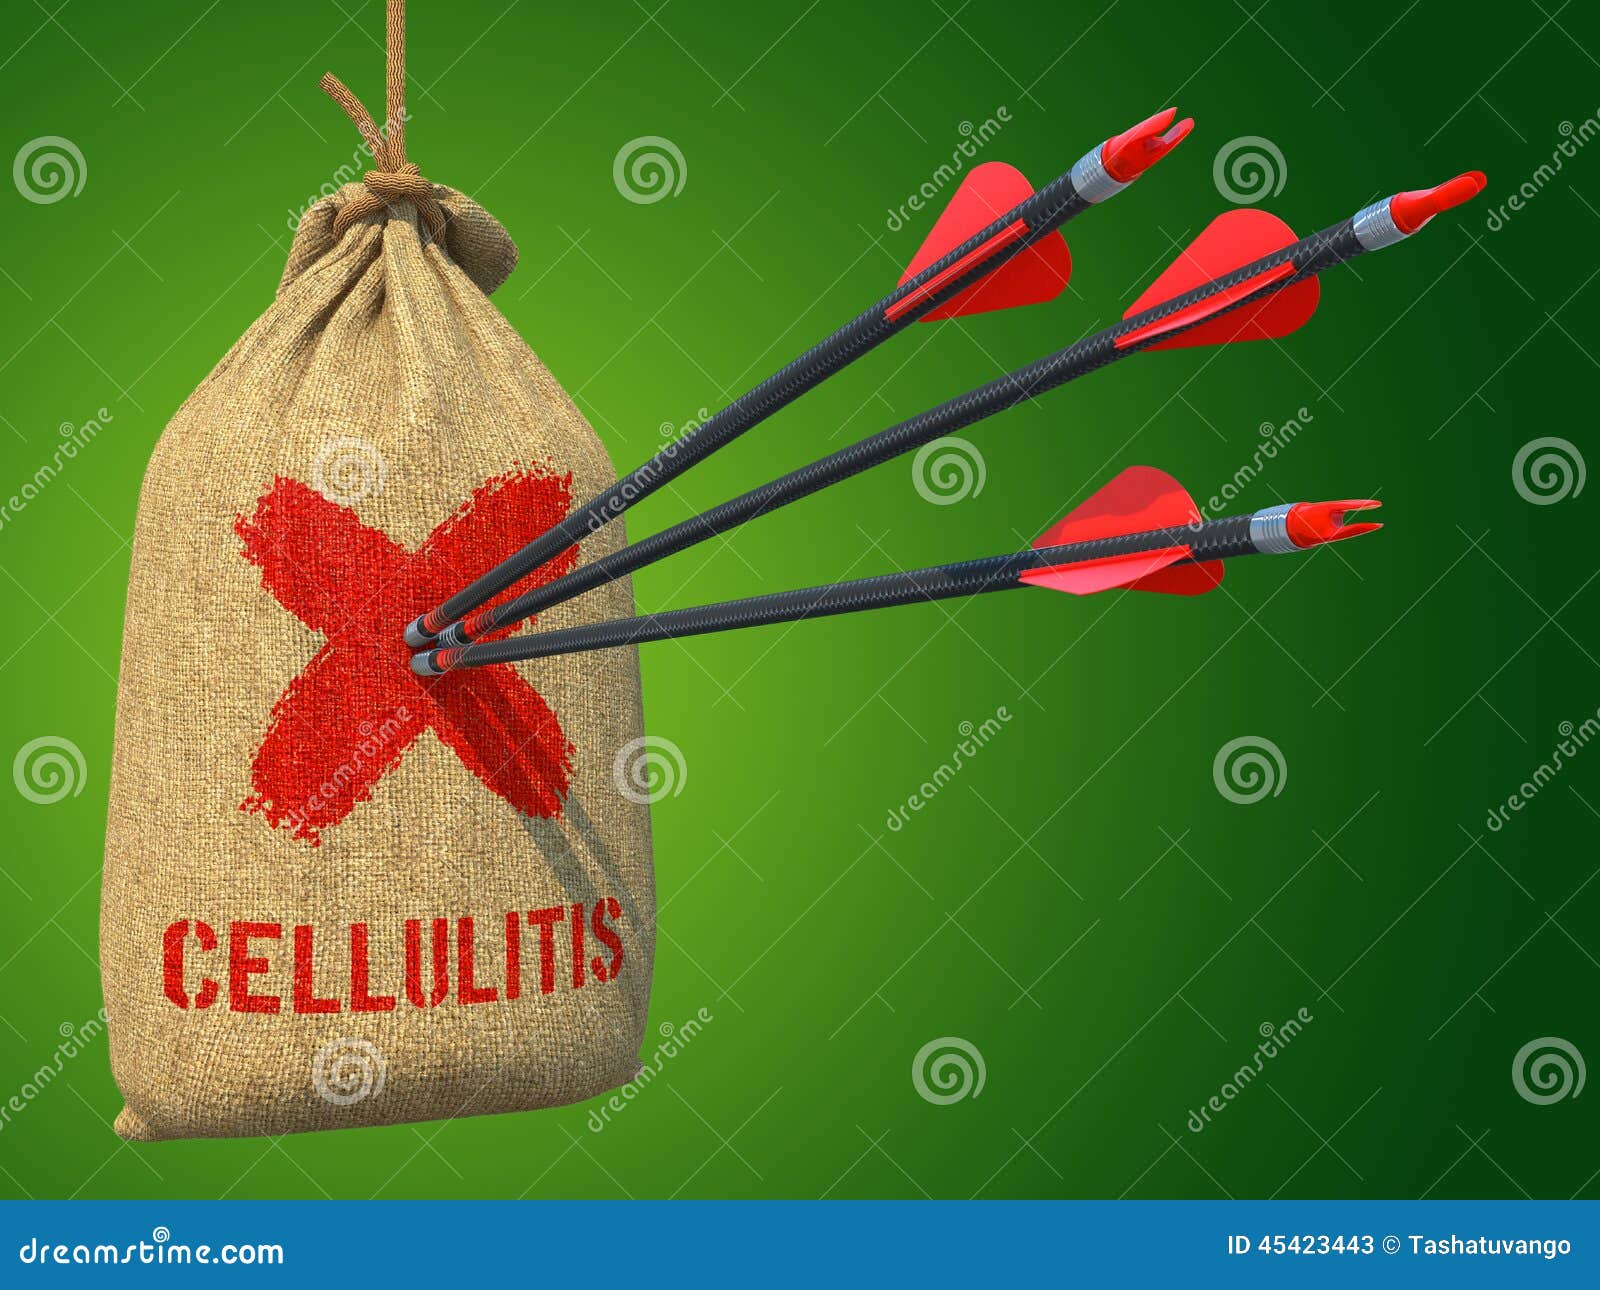 cellulitis - arrows hit in red target.